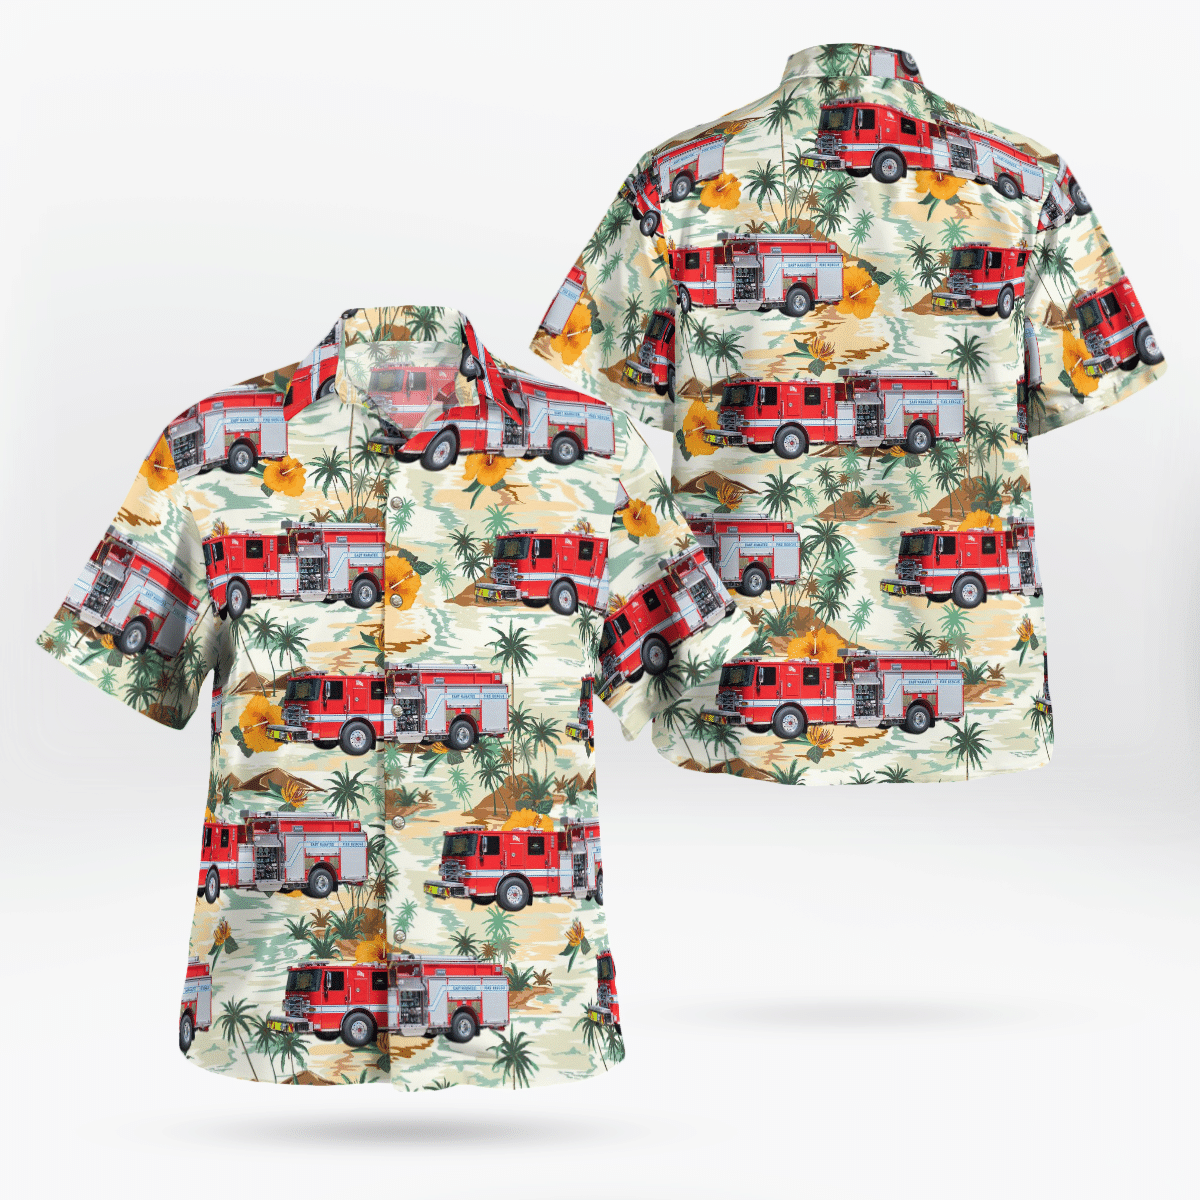 If you want to be noticed, wear These Trendy Hawaiian Shirt 87